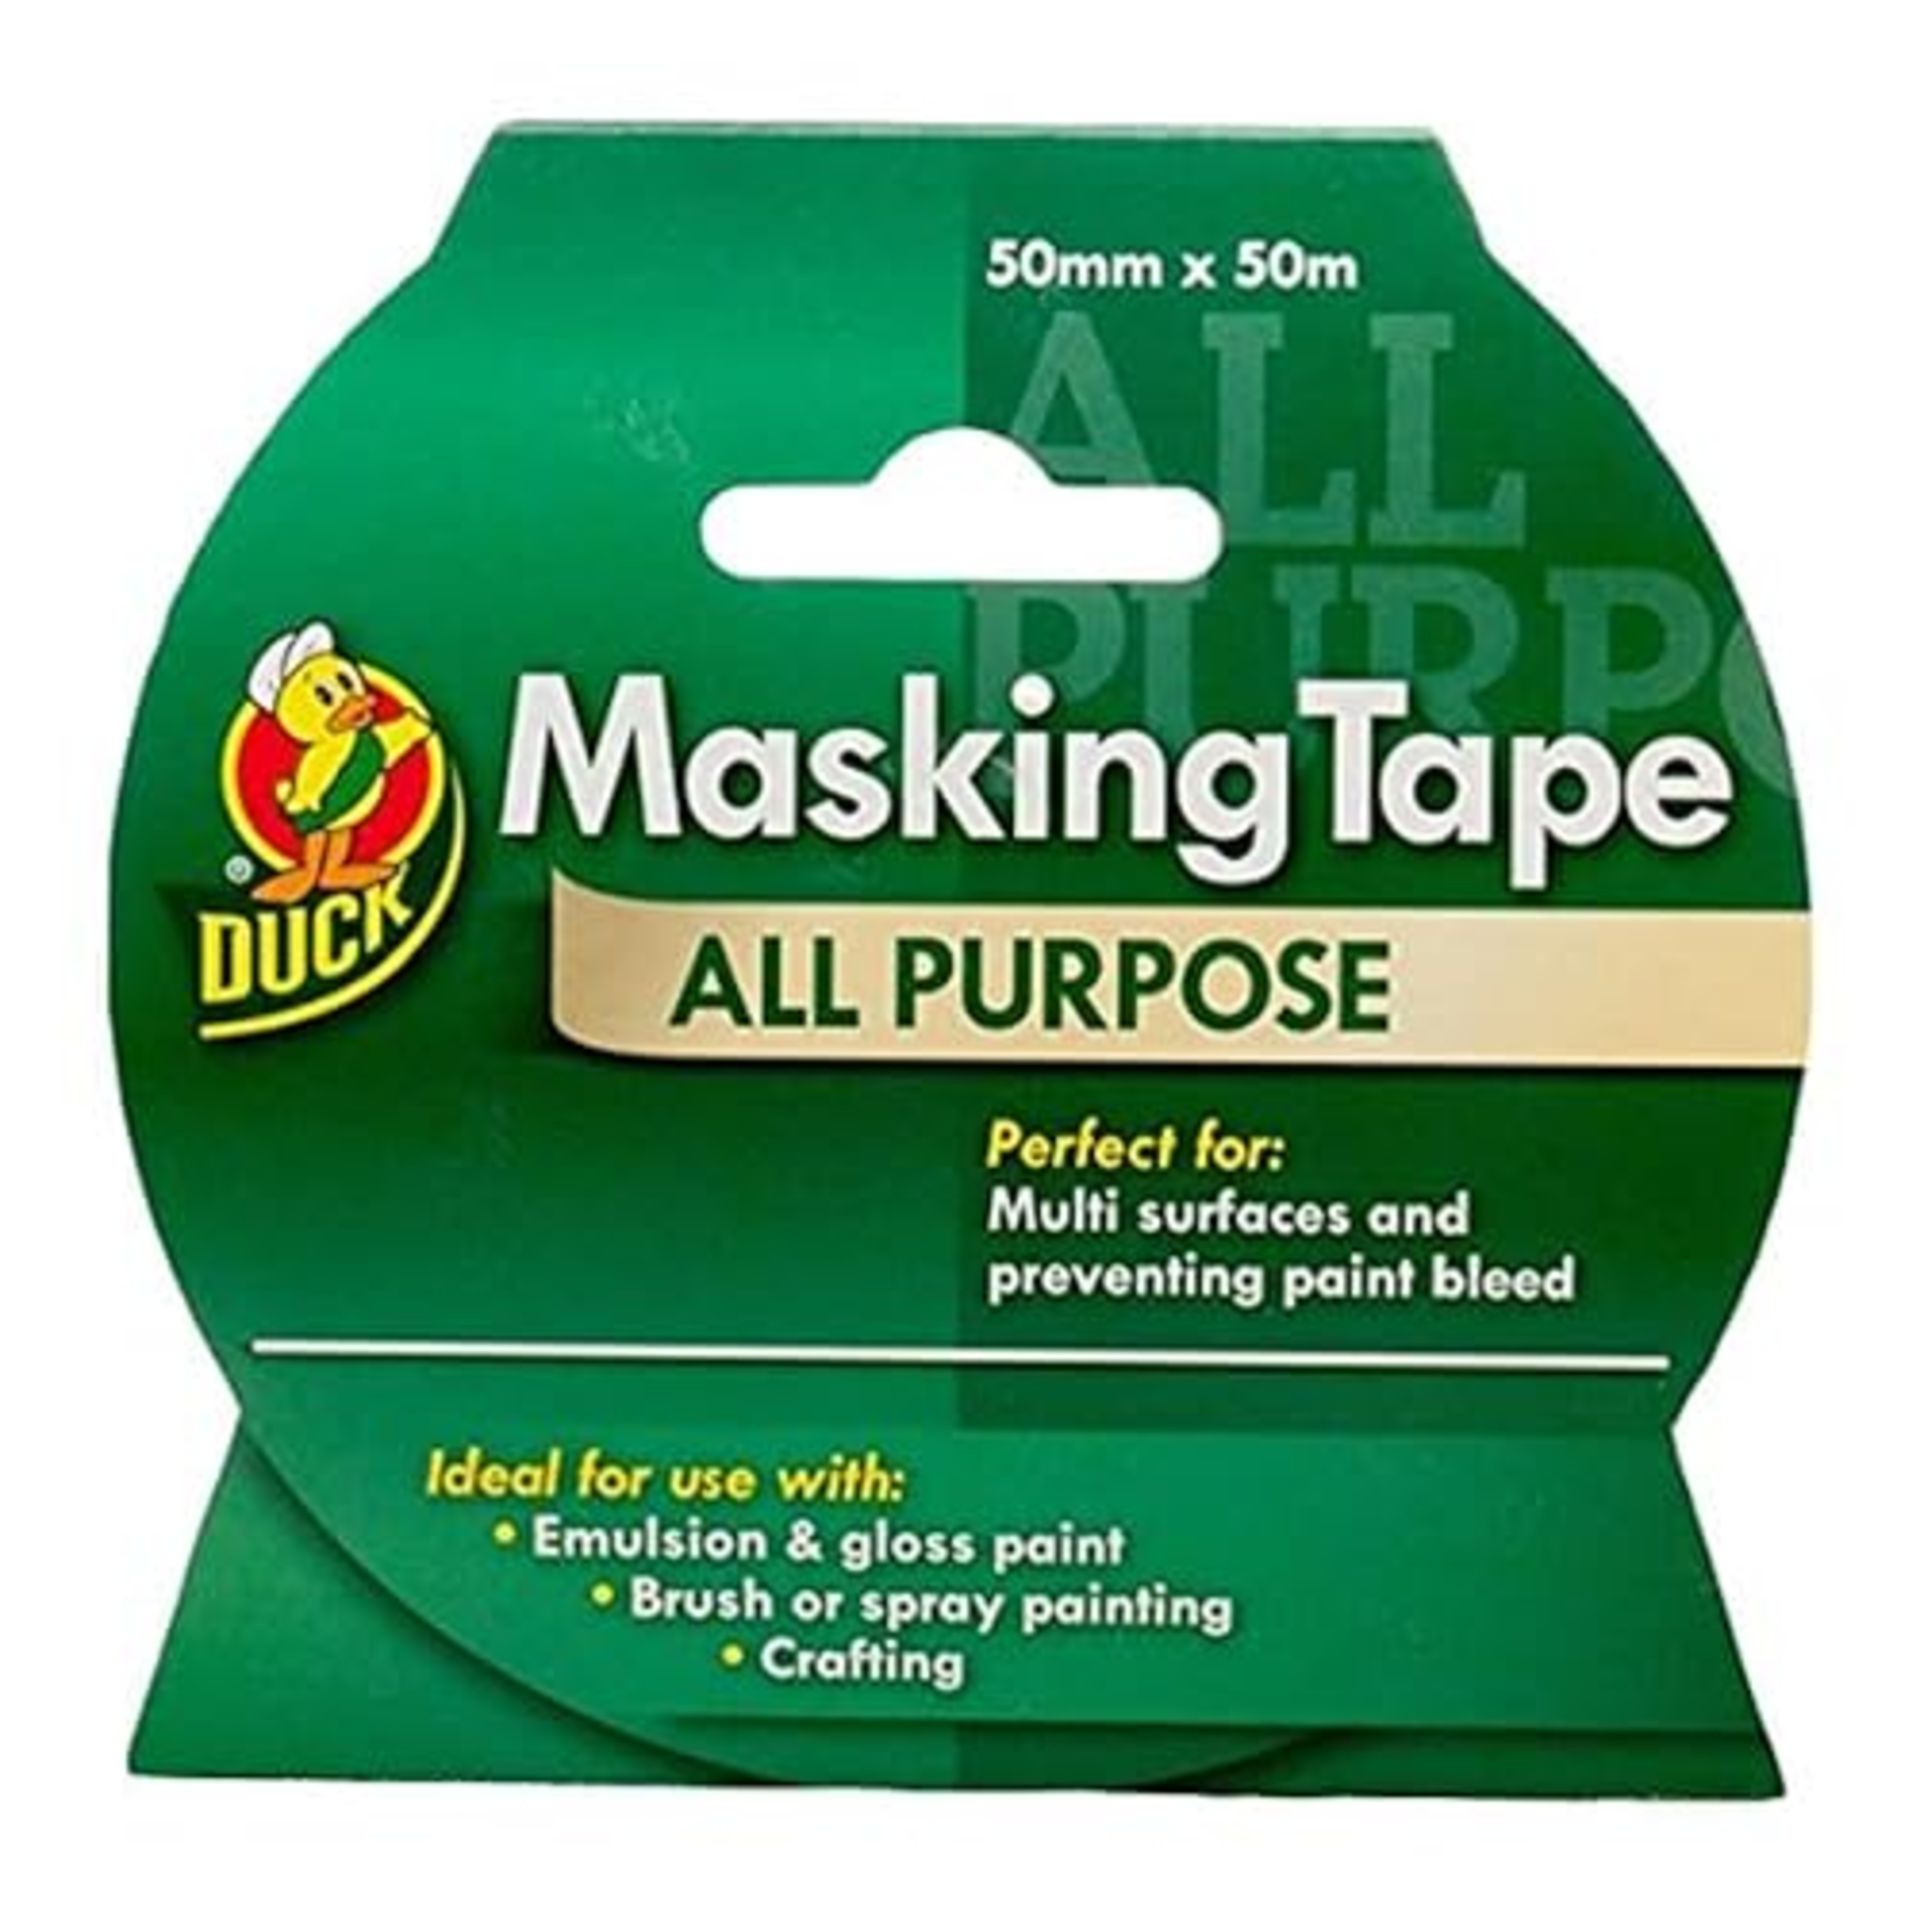 Duck Tape All Purpose Masking Tape 50mm x 50m, indoor painting and decorating for multi surfaces pr